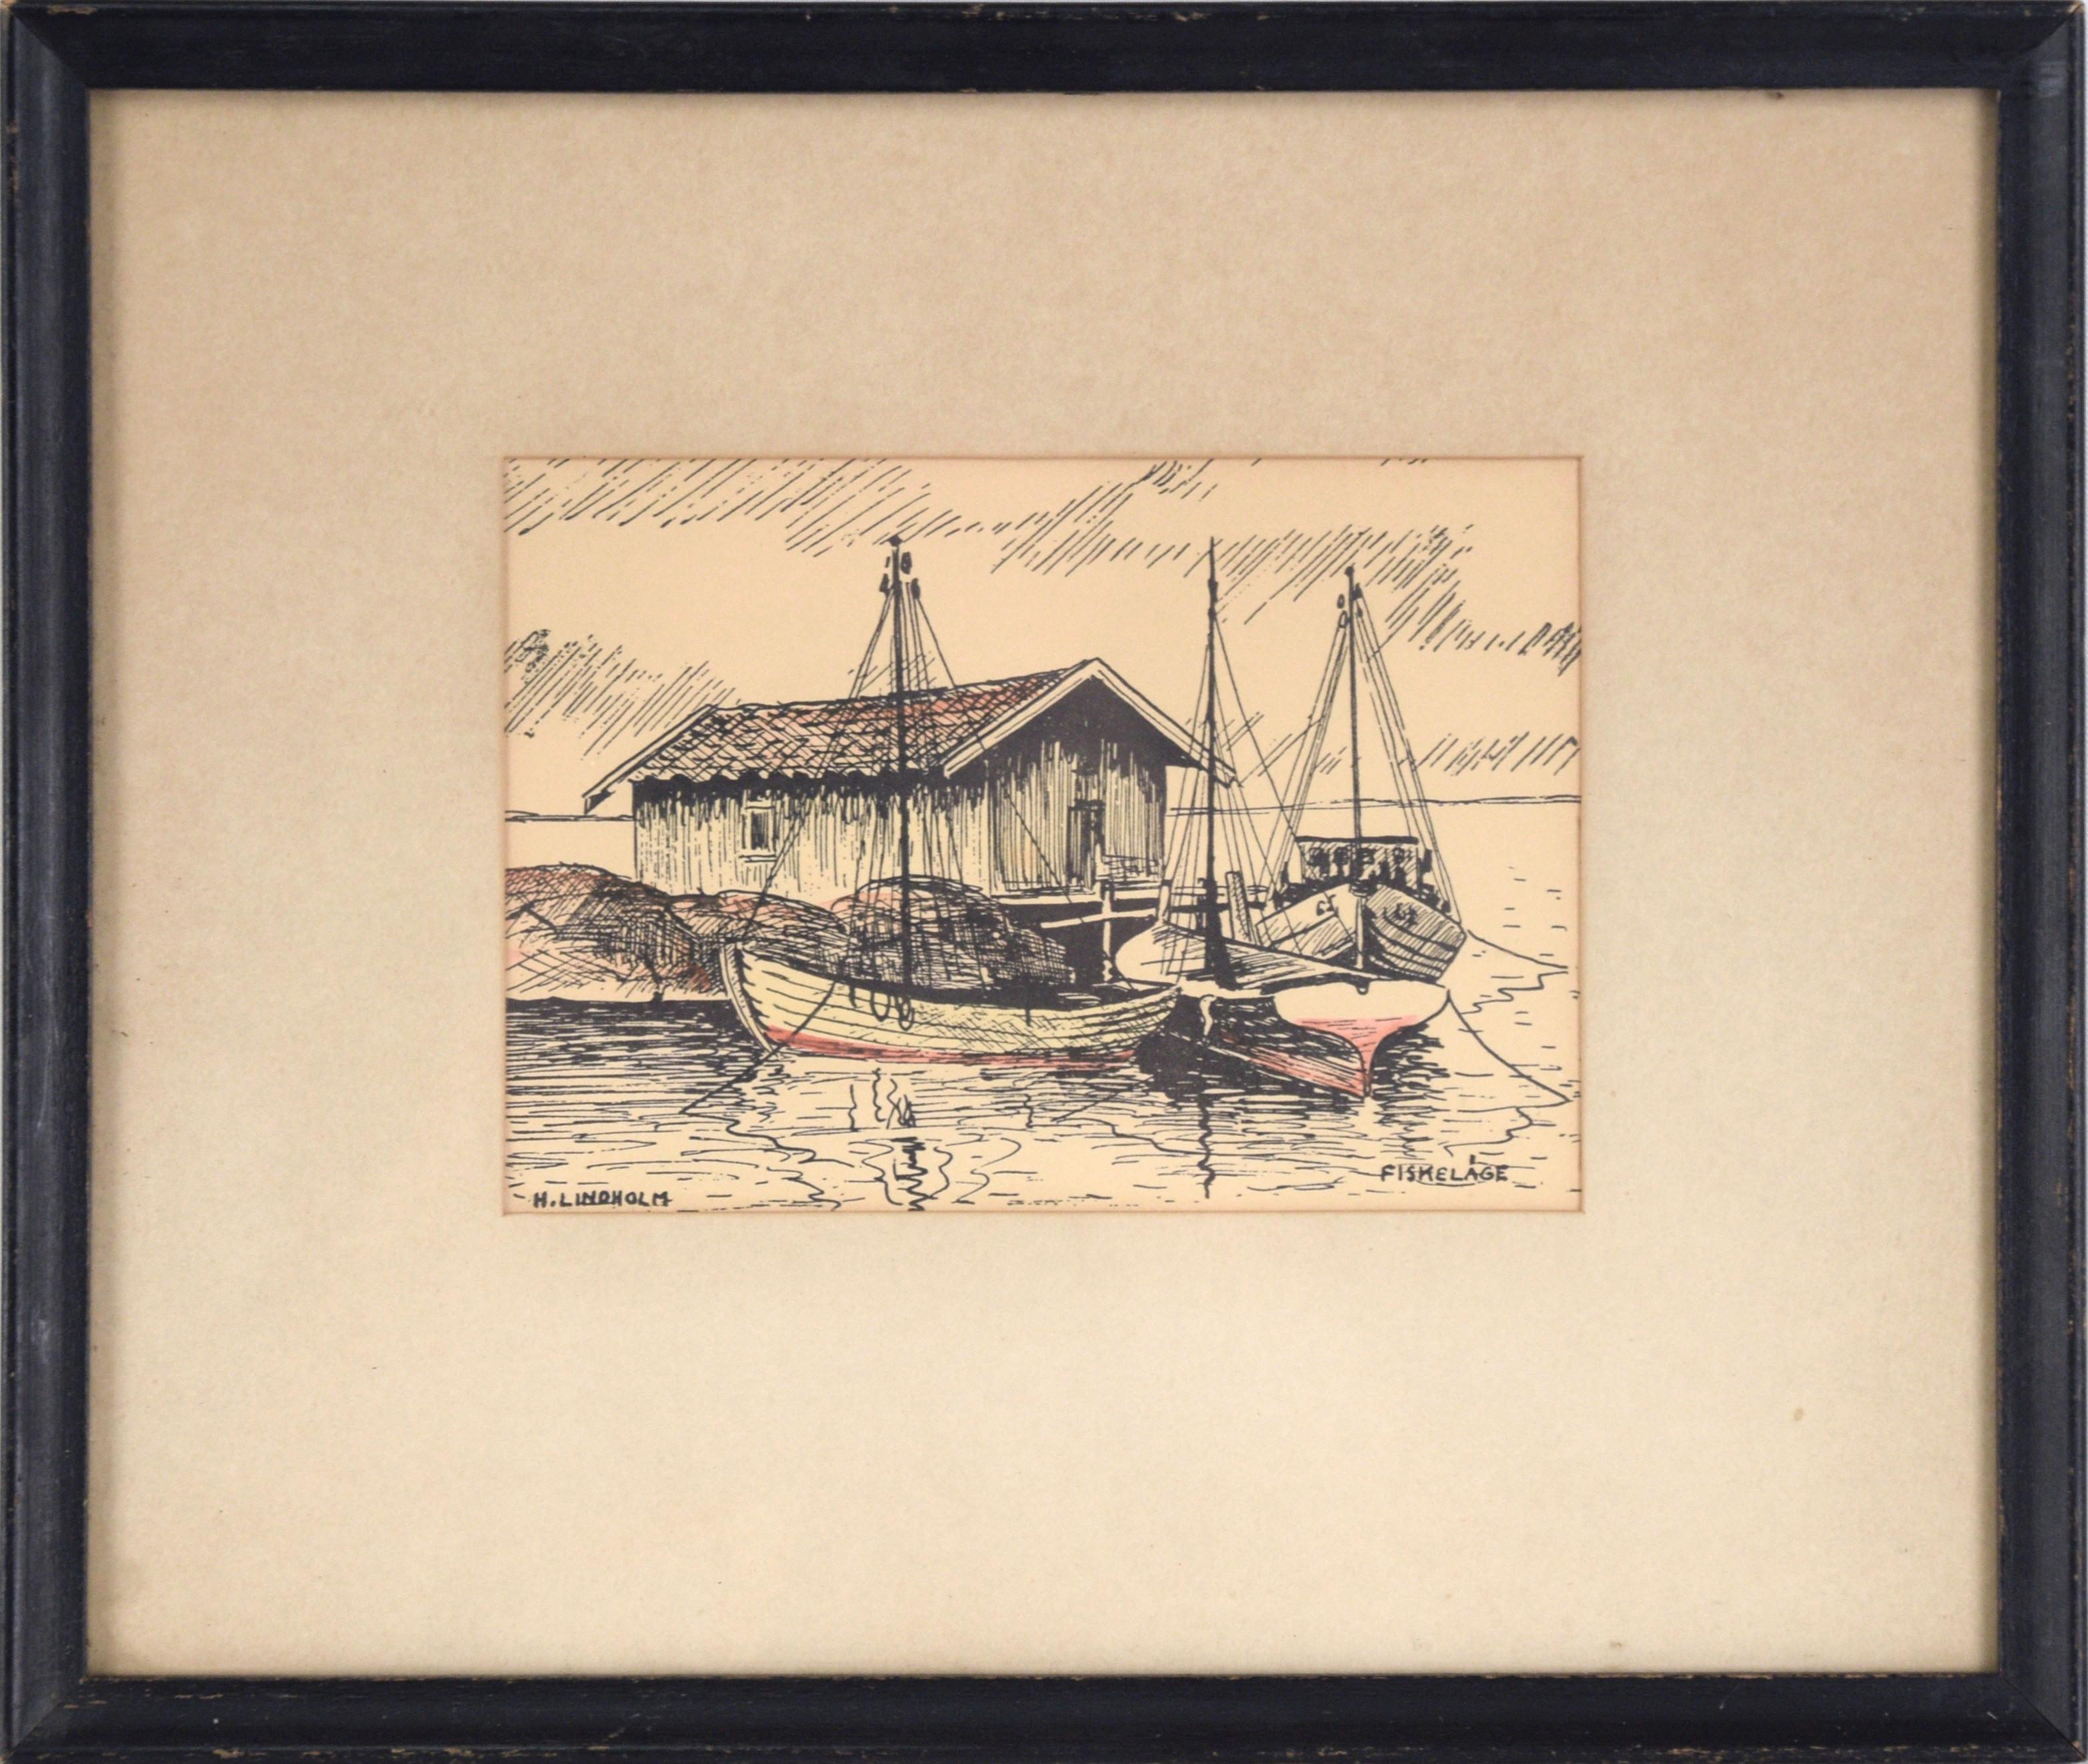 "Fiskelage" (Fishing Village)  - Hand Colored Seascape LIthograph